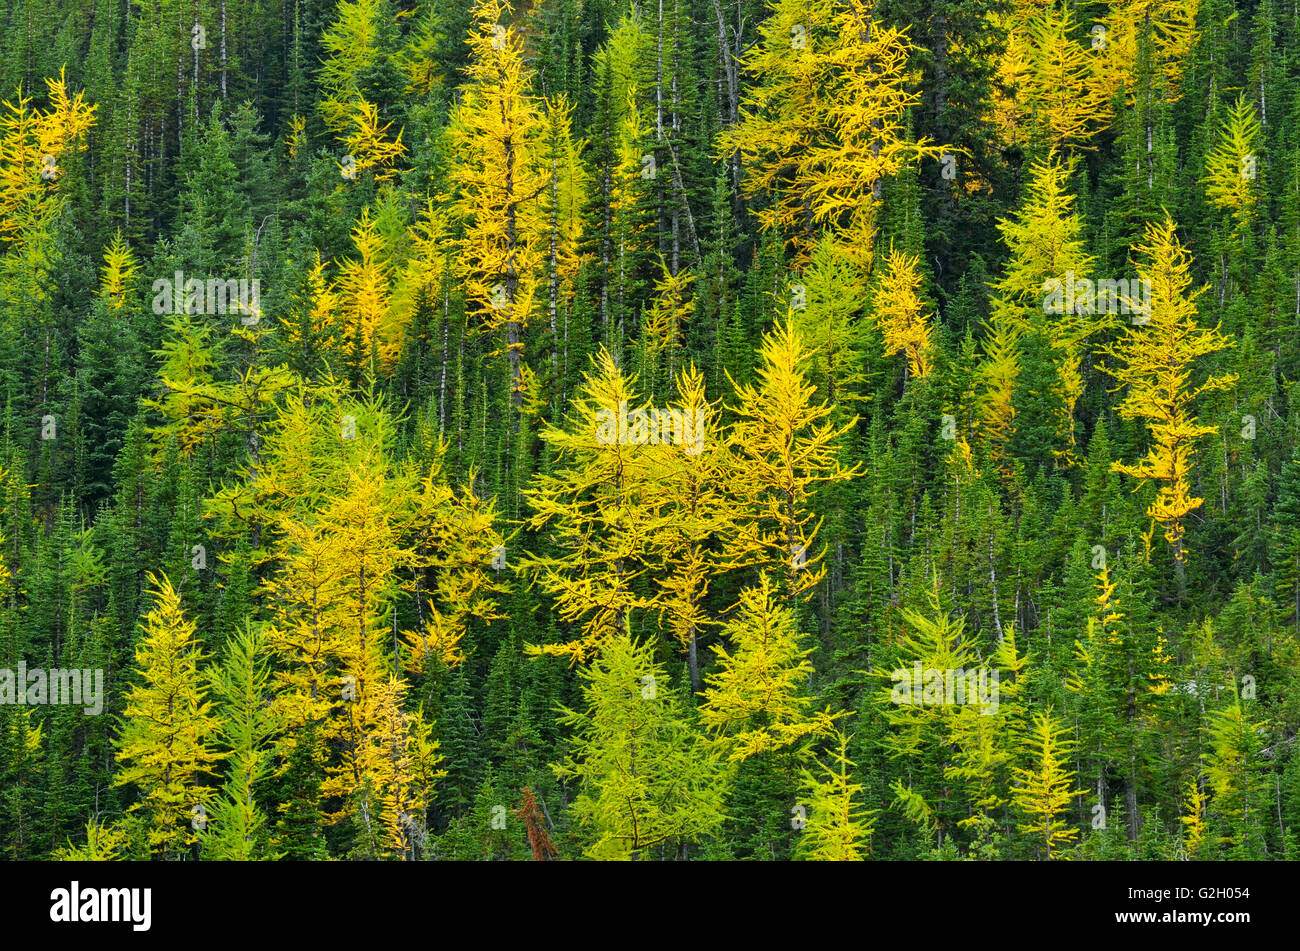 Western larches in autumn color Kananaskis Country Alberta Canada Stock Photo